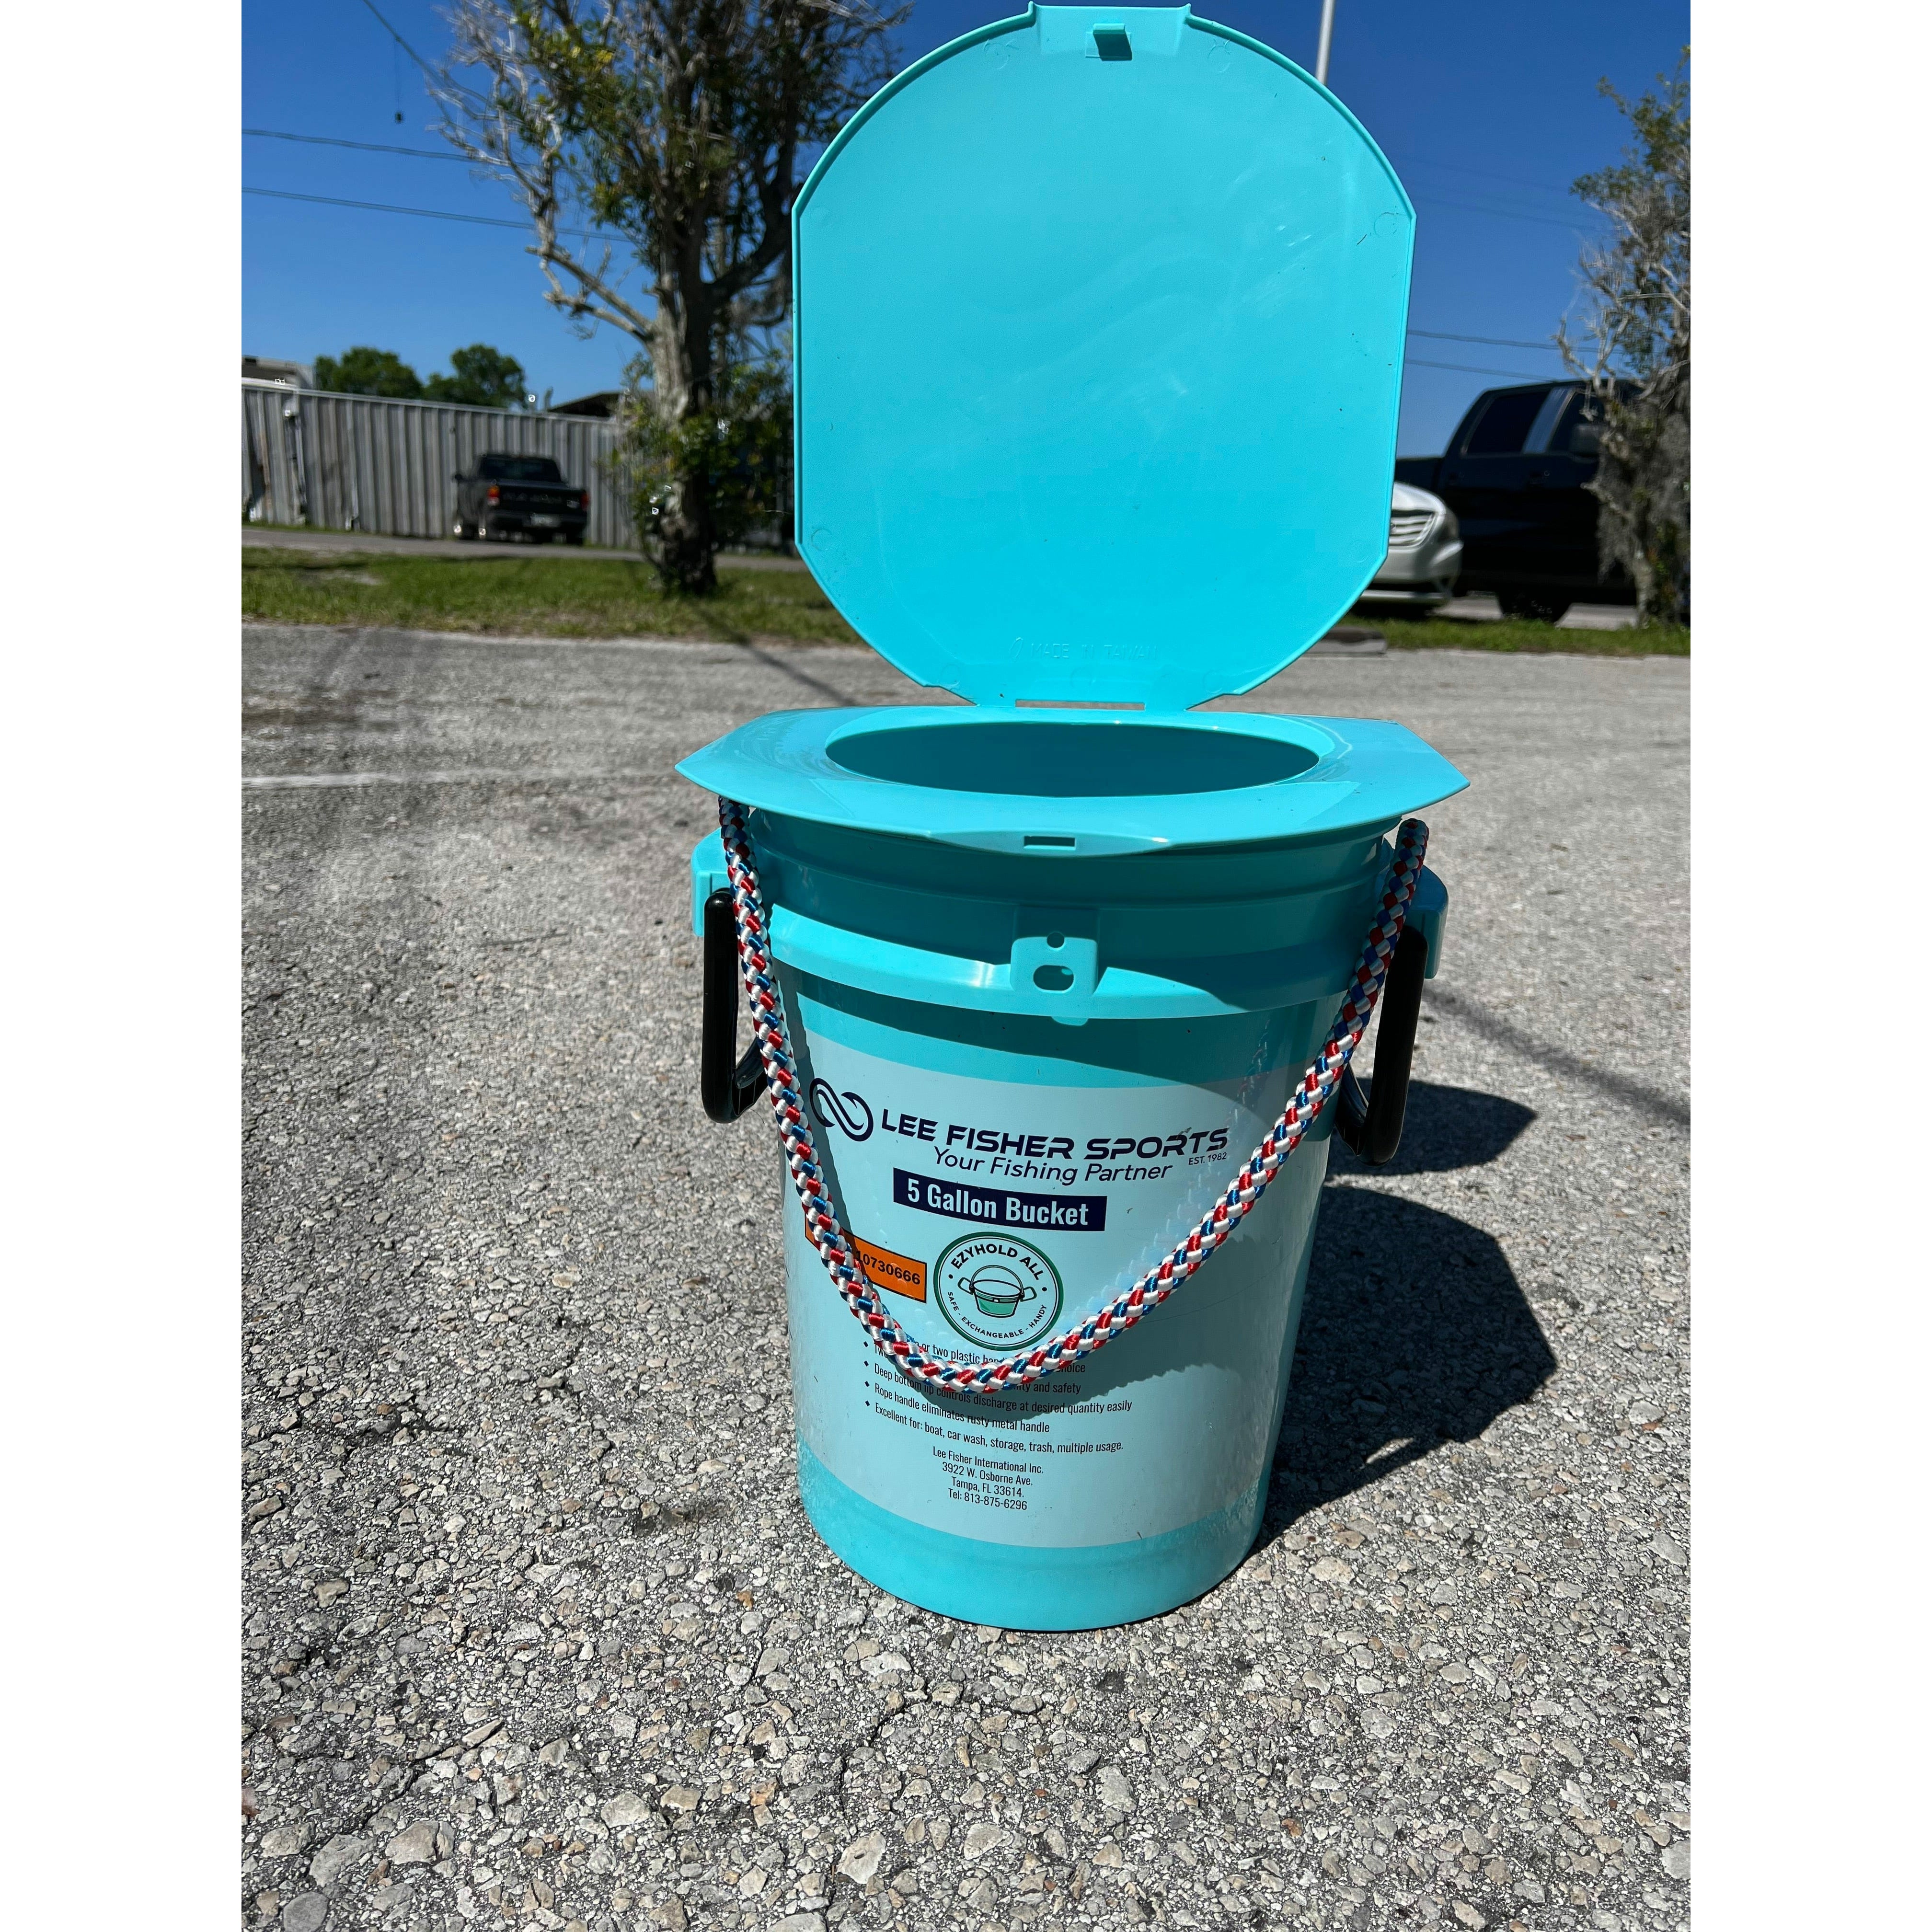 ISMART Portable Toilet -Great for fishing, boating, camping and